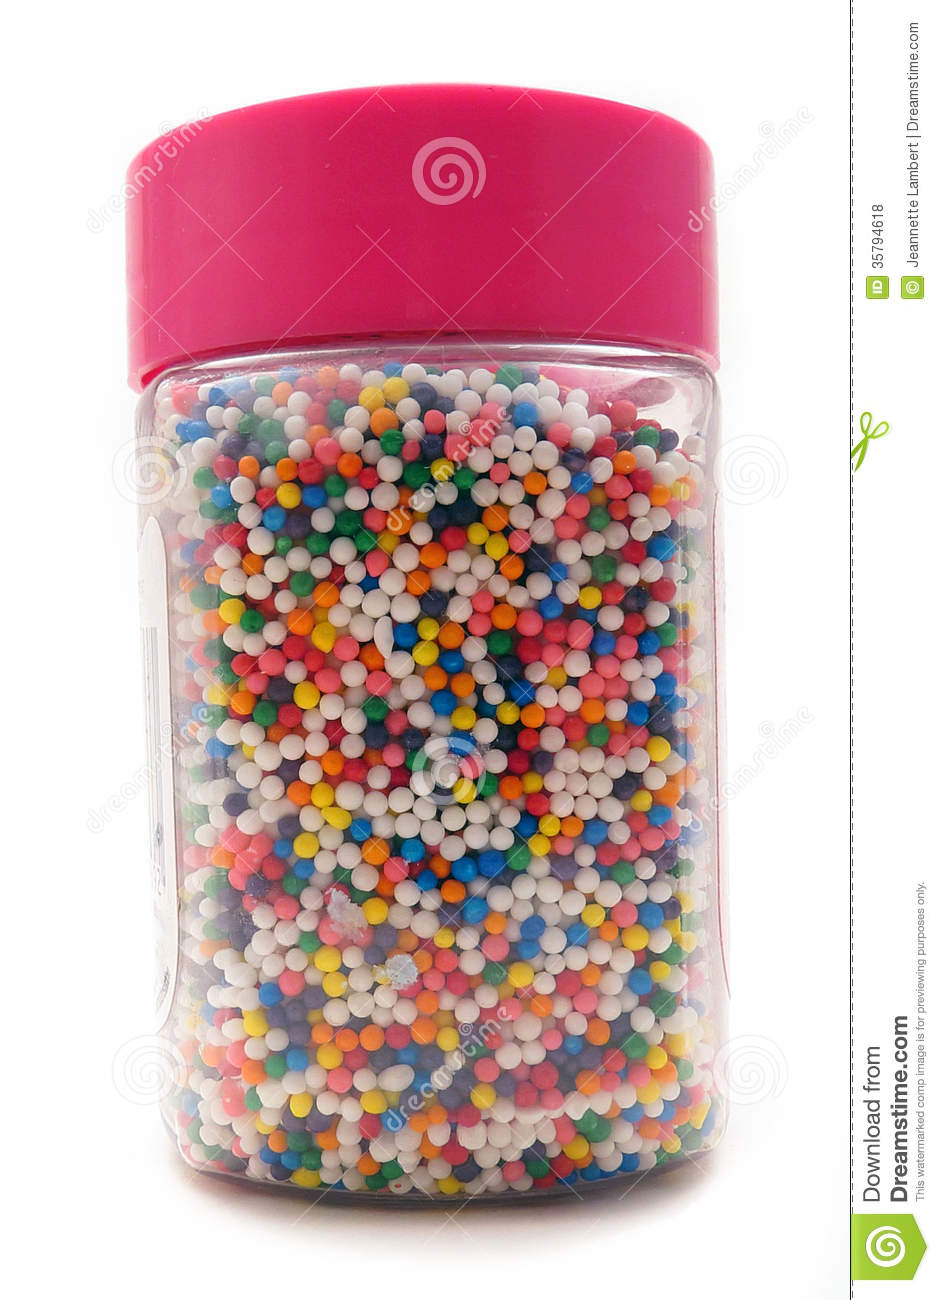 Colorful Sprinkles For Cake Decoration In A Jar With Pink Lid